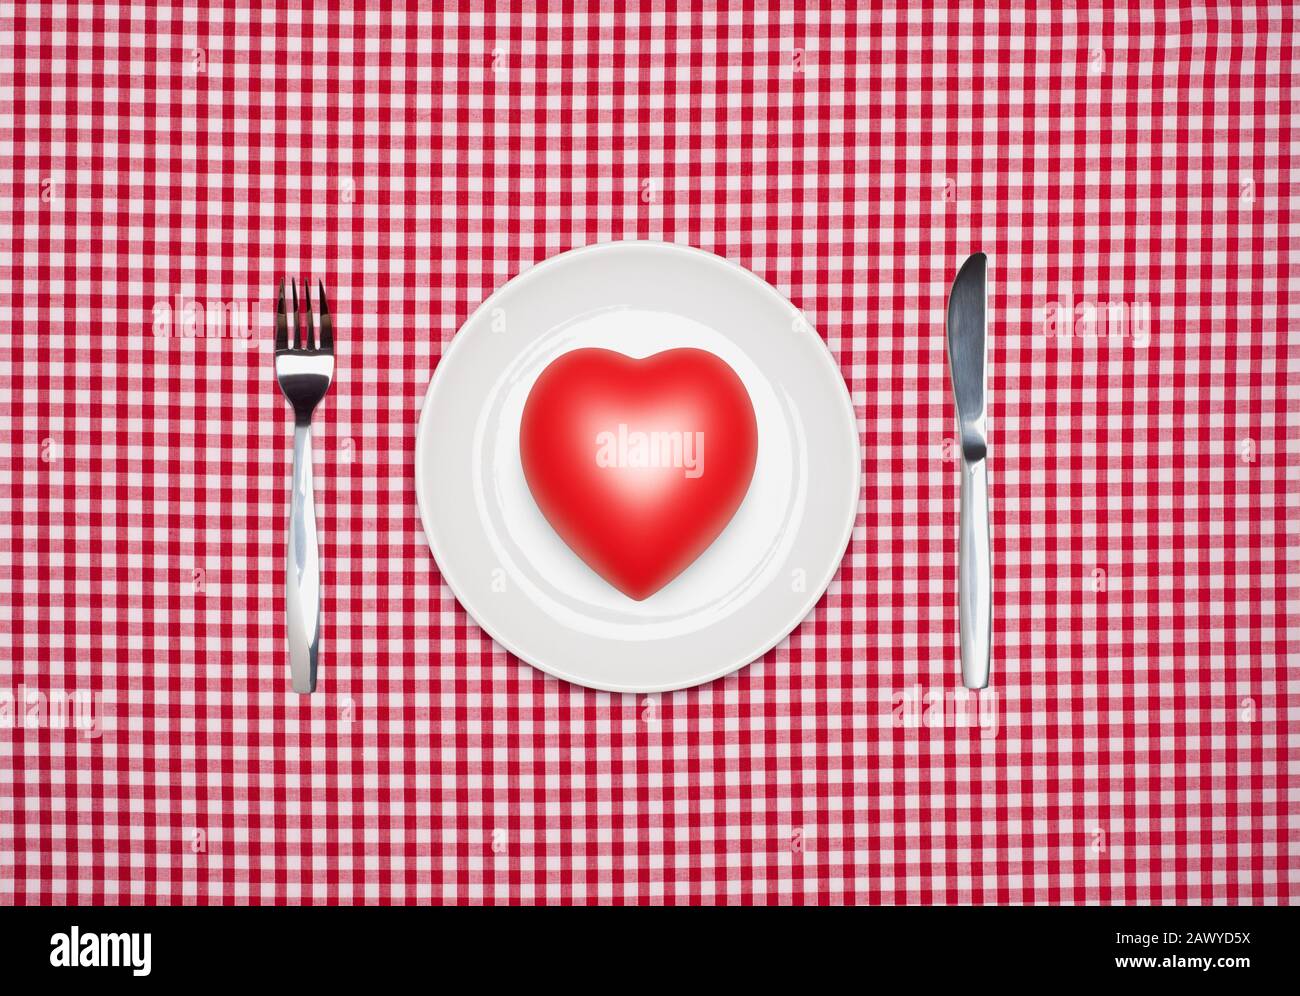 Healthy eating concept, a red heart on a round white plate with knife and fork from above on a red gingham tablecloth Stock Photo